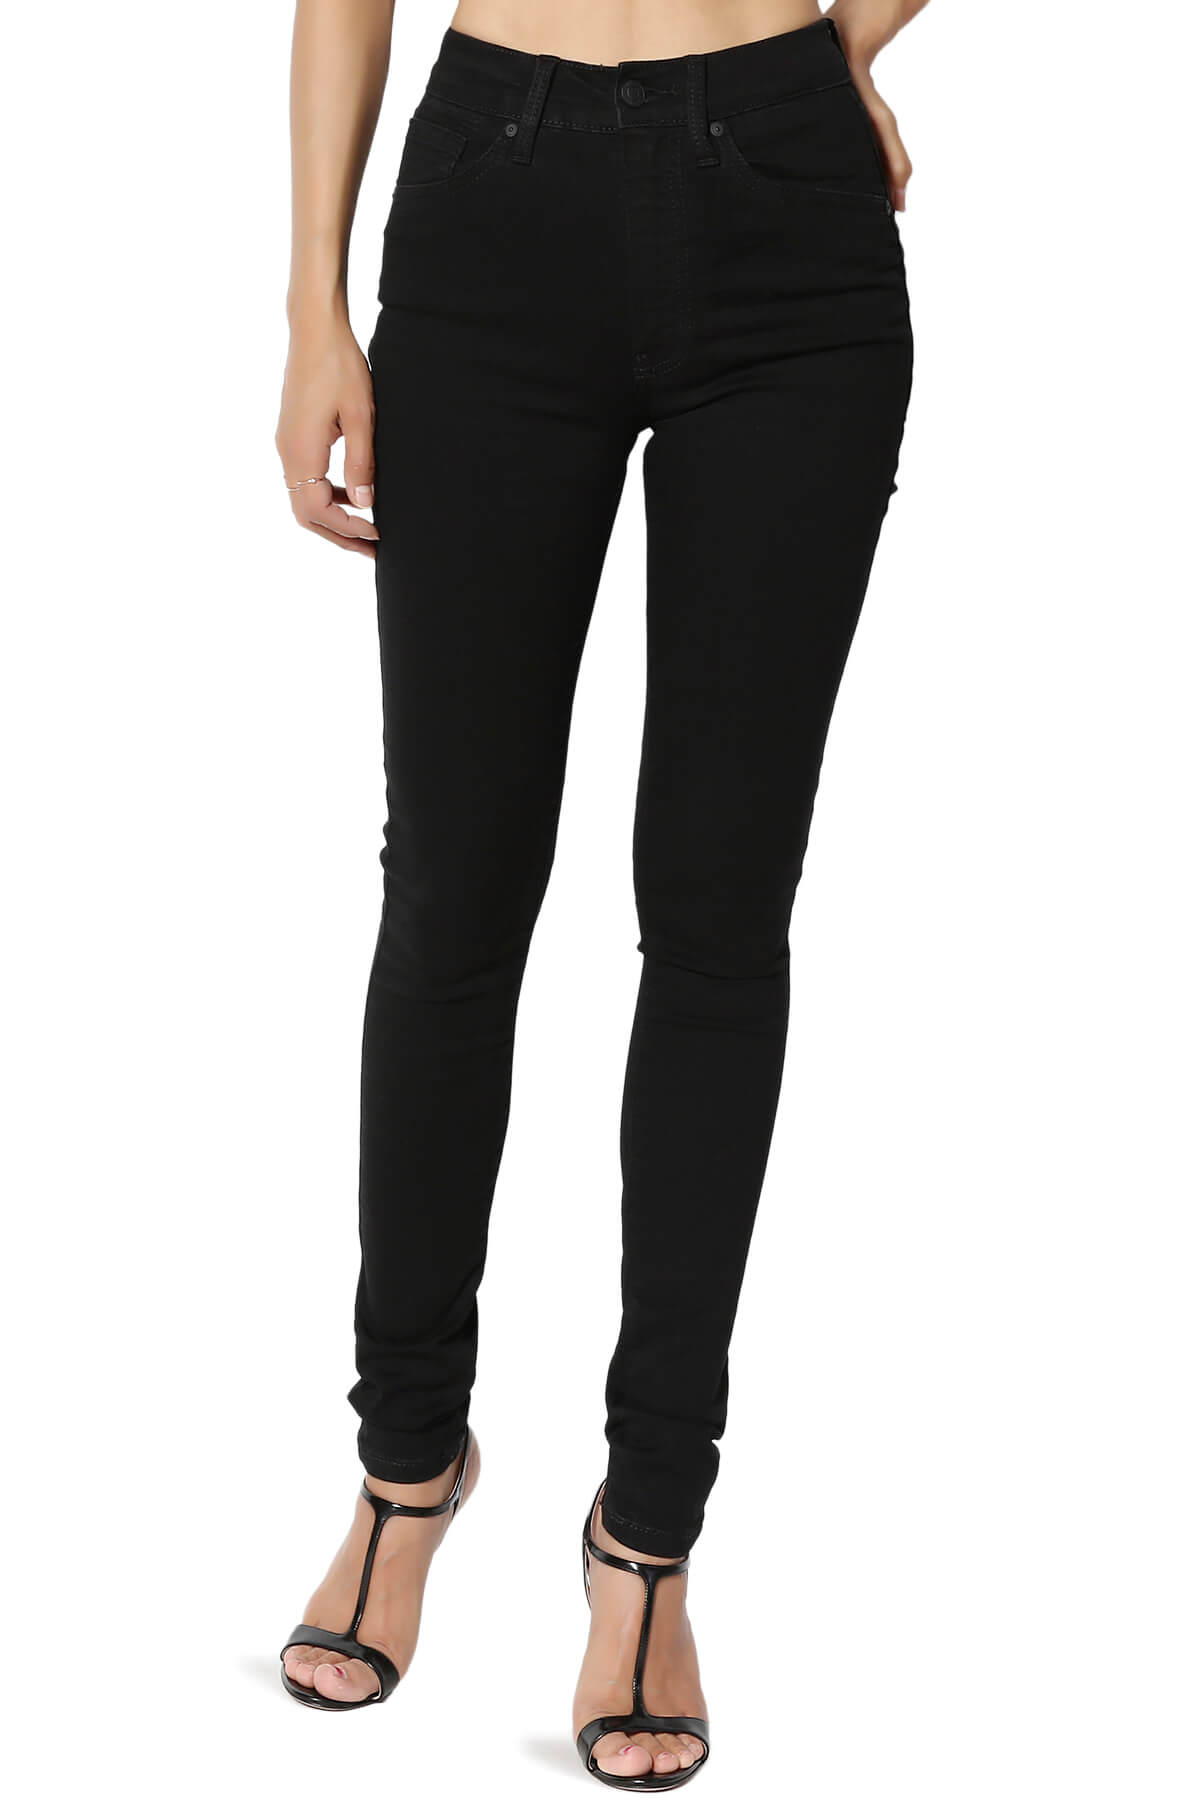 Women's High Rise 5 Pocket Soft & Stretch Denim 28in Inseam Ankle Skinnny Jeans - image 1 of 7